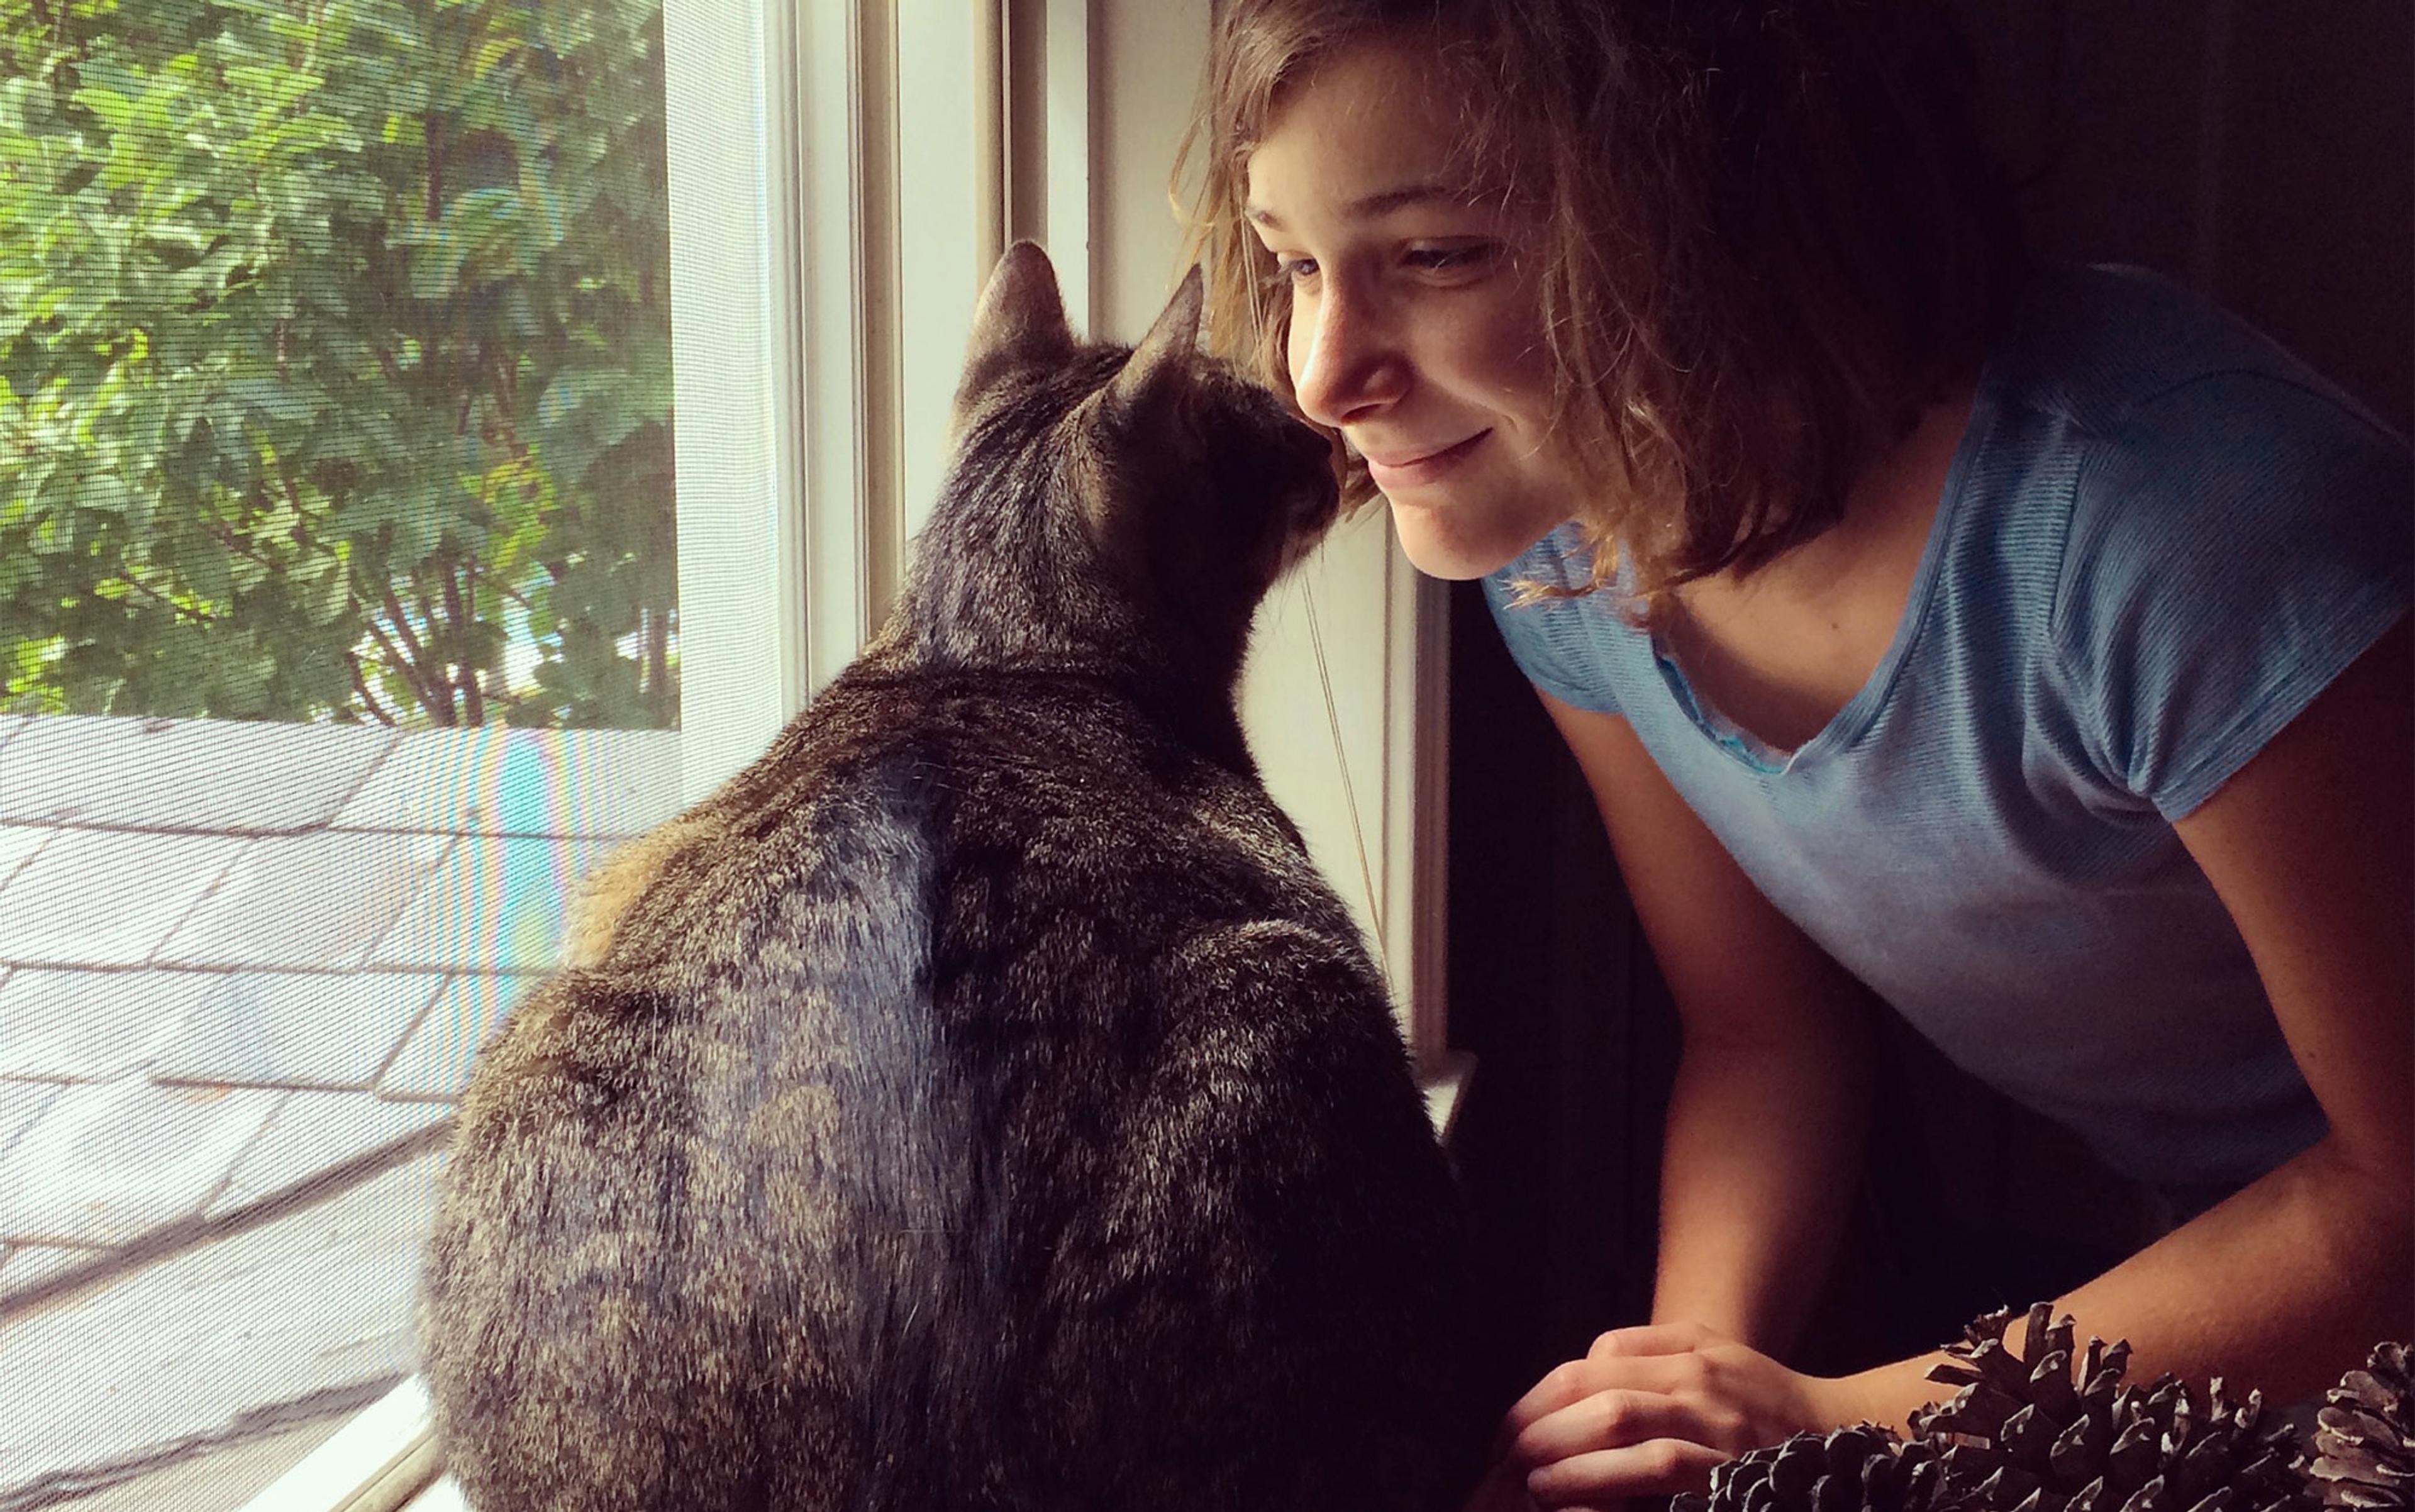 A smiling young girl and a cat, nose to nose, by a window sill, with pinecones beside them